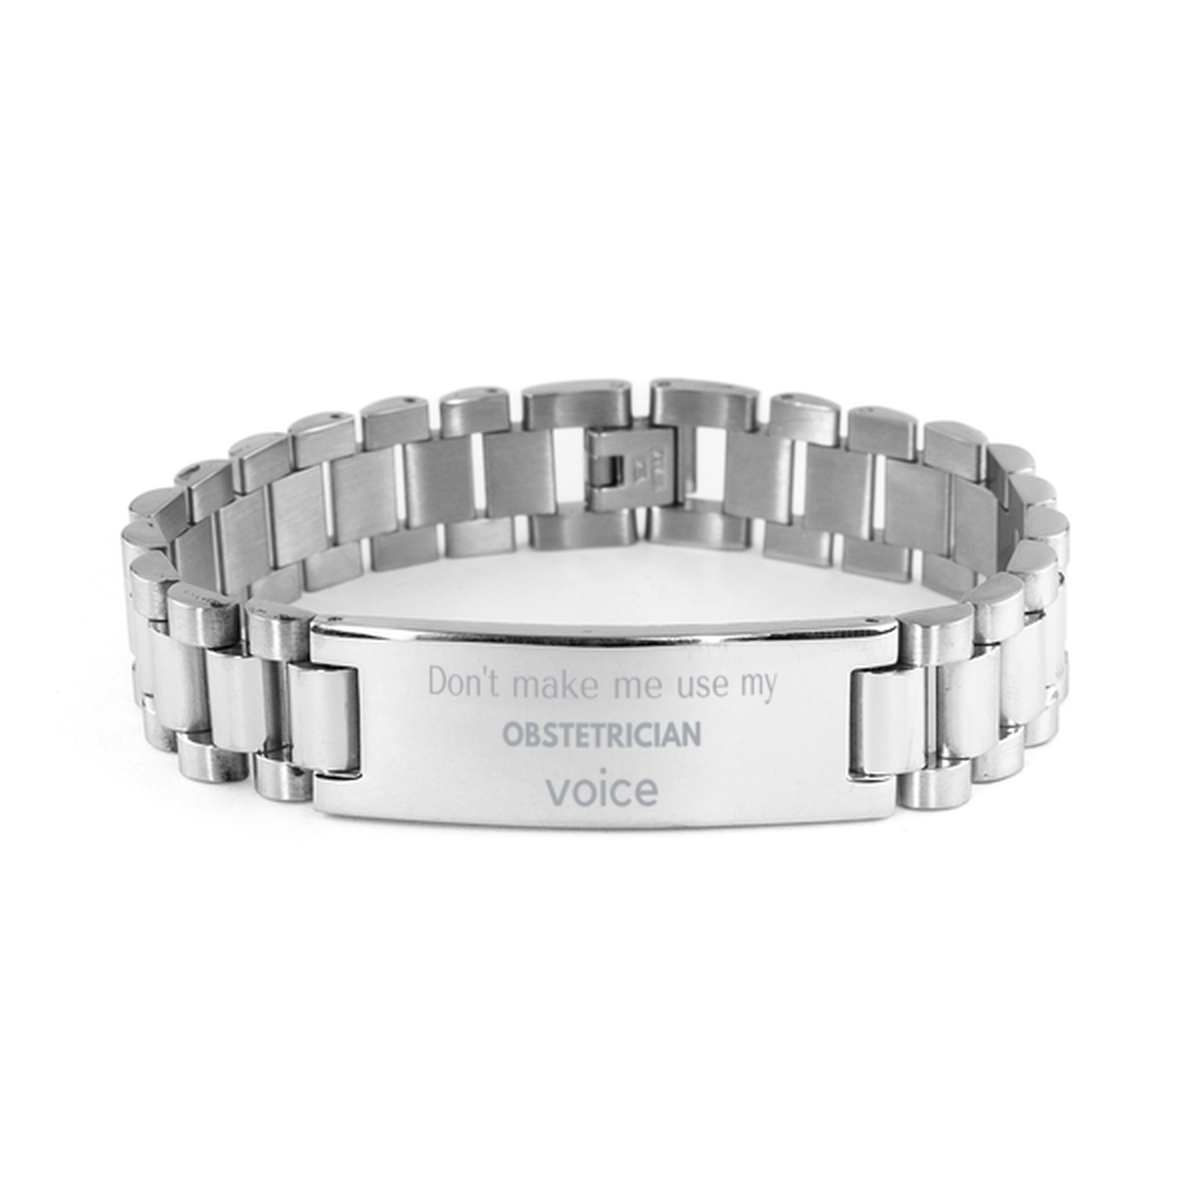 Don't make me use my Obstetrician voice, Sarcasm Obstetrician Gifts, Christmas Obstetrician Ladder Stainless Steel Bracelet Birthday Unique Gifts For Obstetrician Coworkers, Men, Women, Colleague, Friends